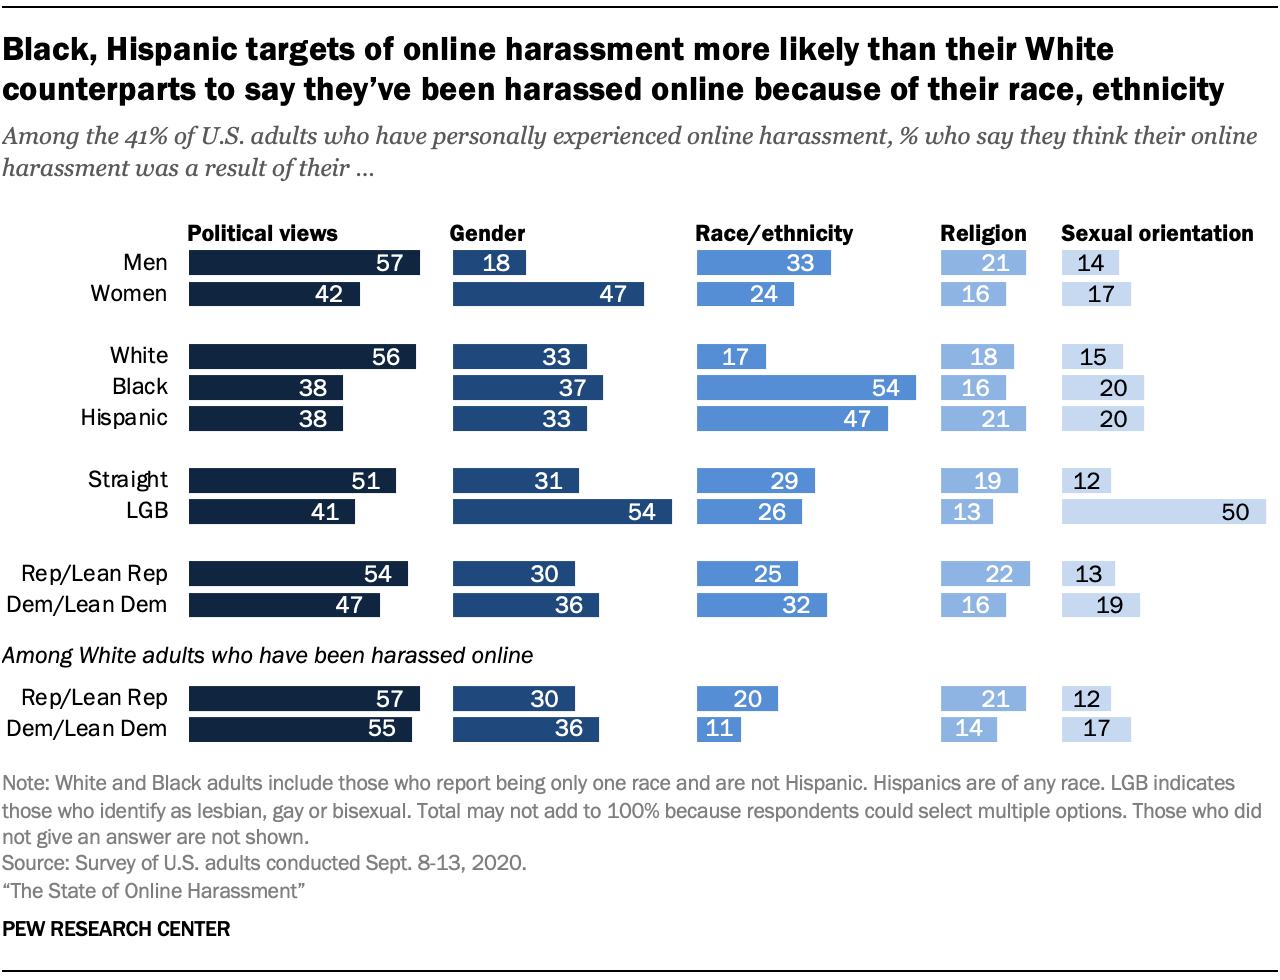 Black, Hispanic targets of online harassment more likely than their White counterparts to say they’ve been harassed online because of their race, ethnicity